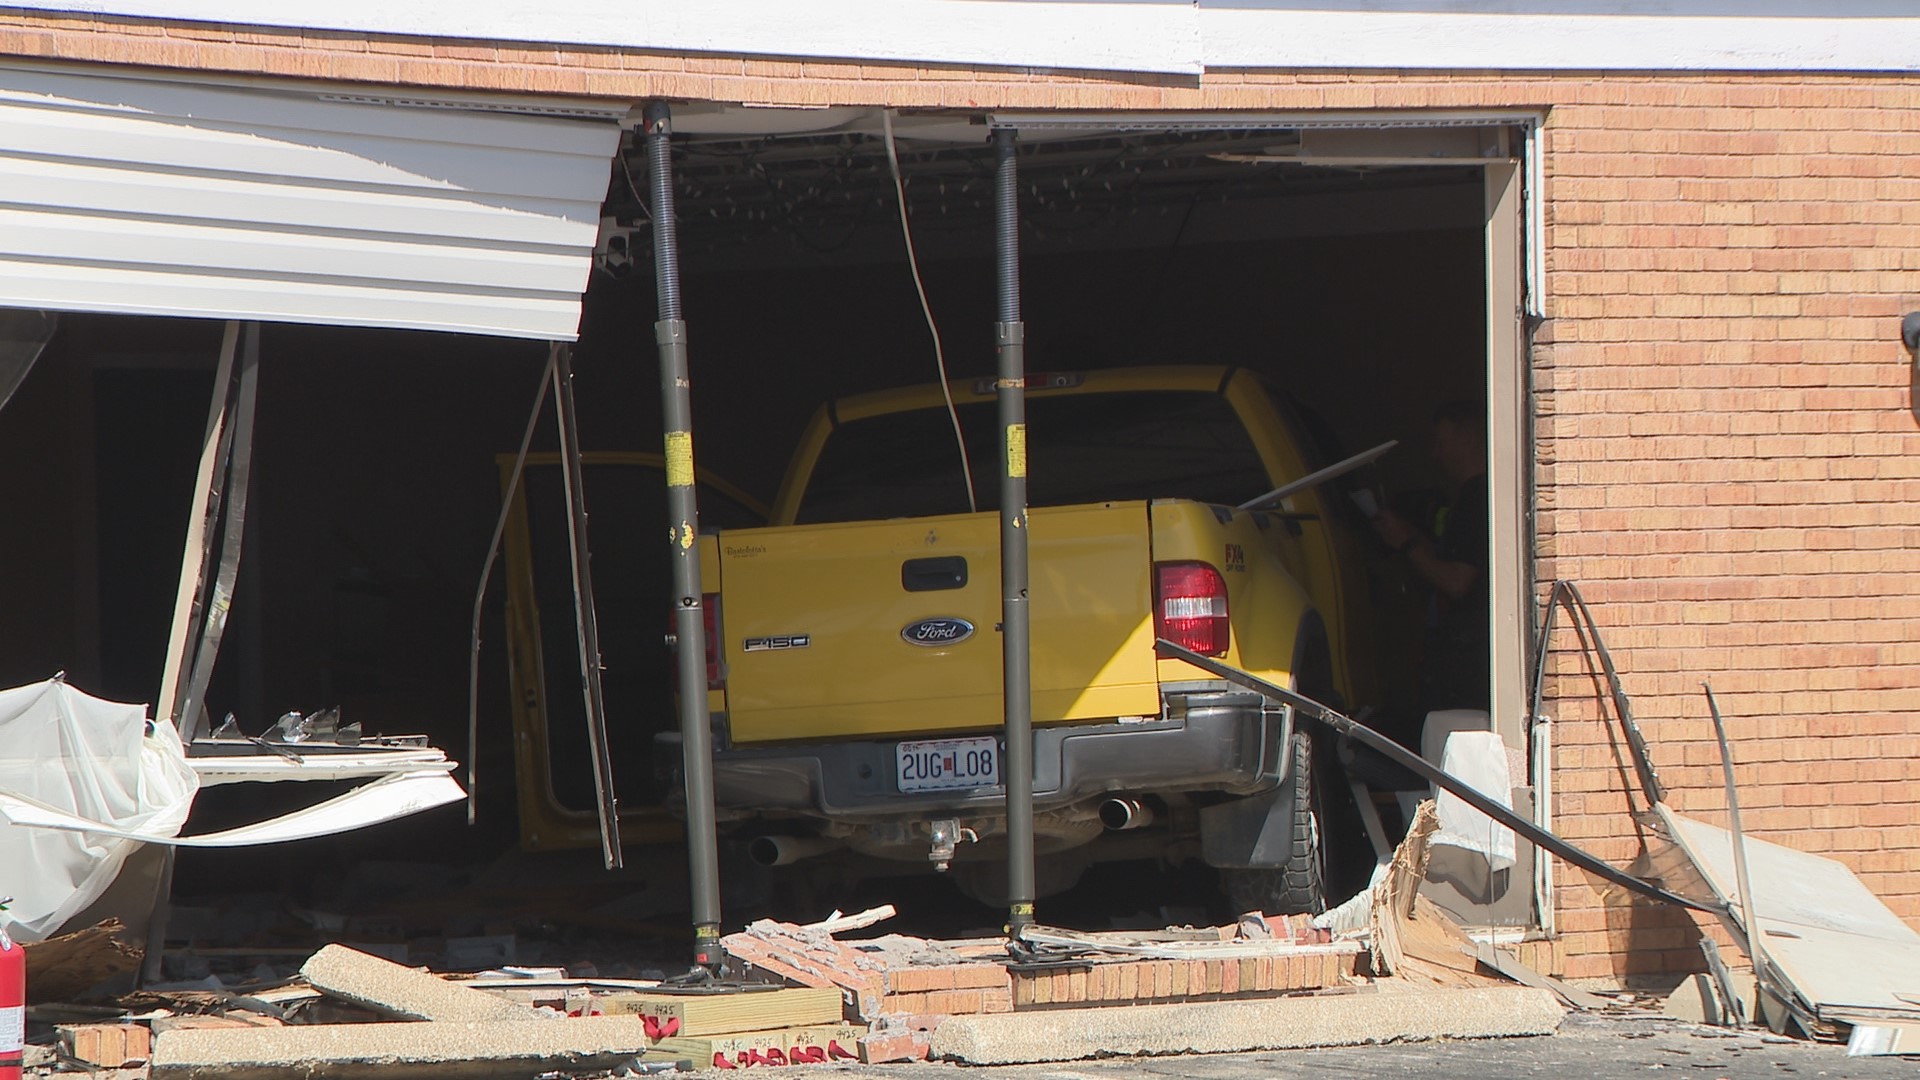 Fortunately, no one was inside the church's community building at the time of the crash. Firefighters said the only injury was to the driver of the pickup truck.